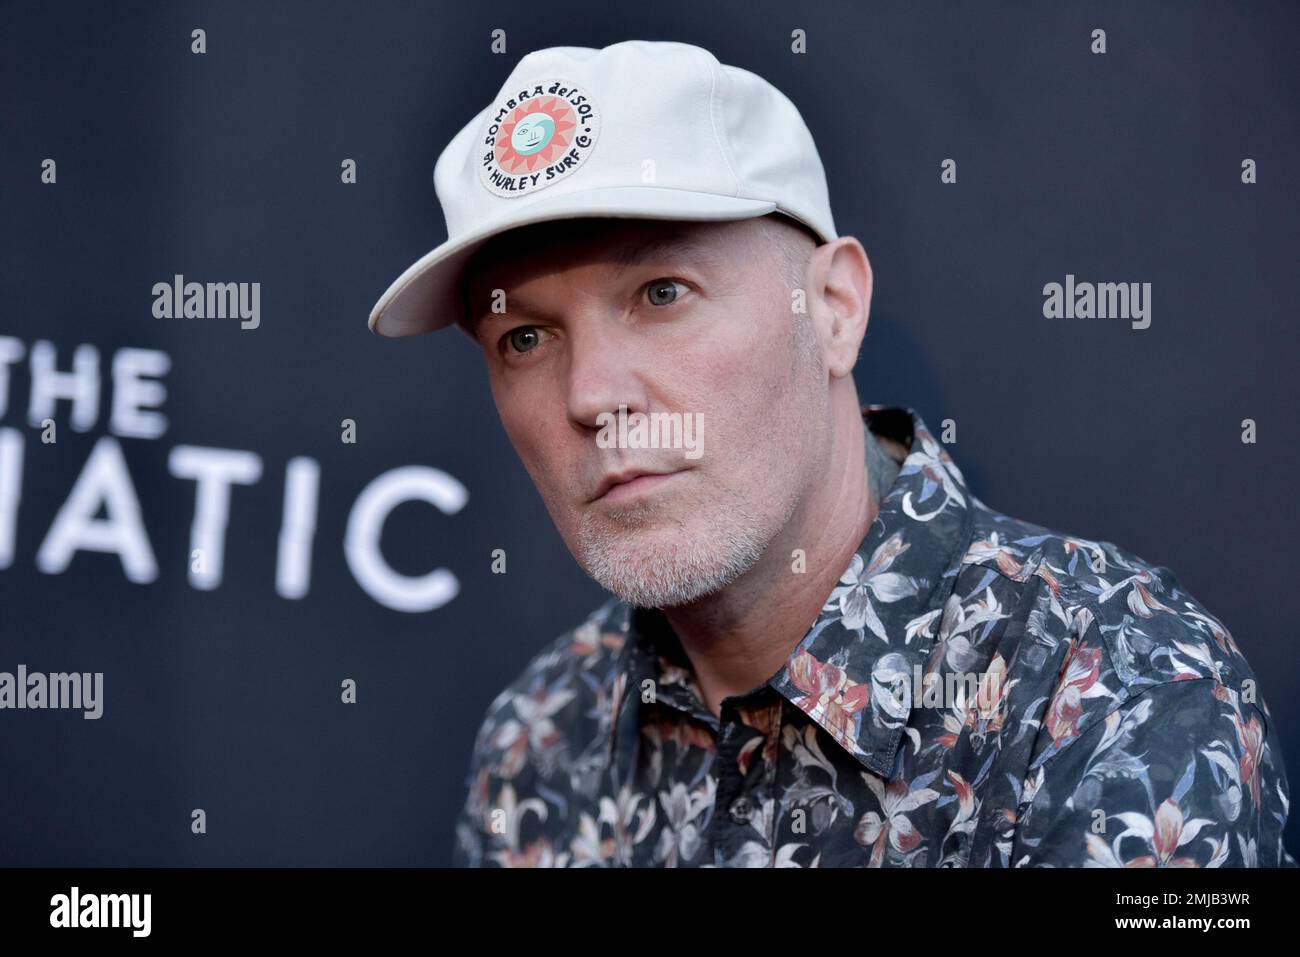 Fred Durst attends the LA premiere of "The Fanatic" at the Egyptian Theatre on Thursday, Aug. 22, 2019, in Los Angeles. (Photo by Richard Shotwell/Invision/AP) Stockfoto